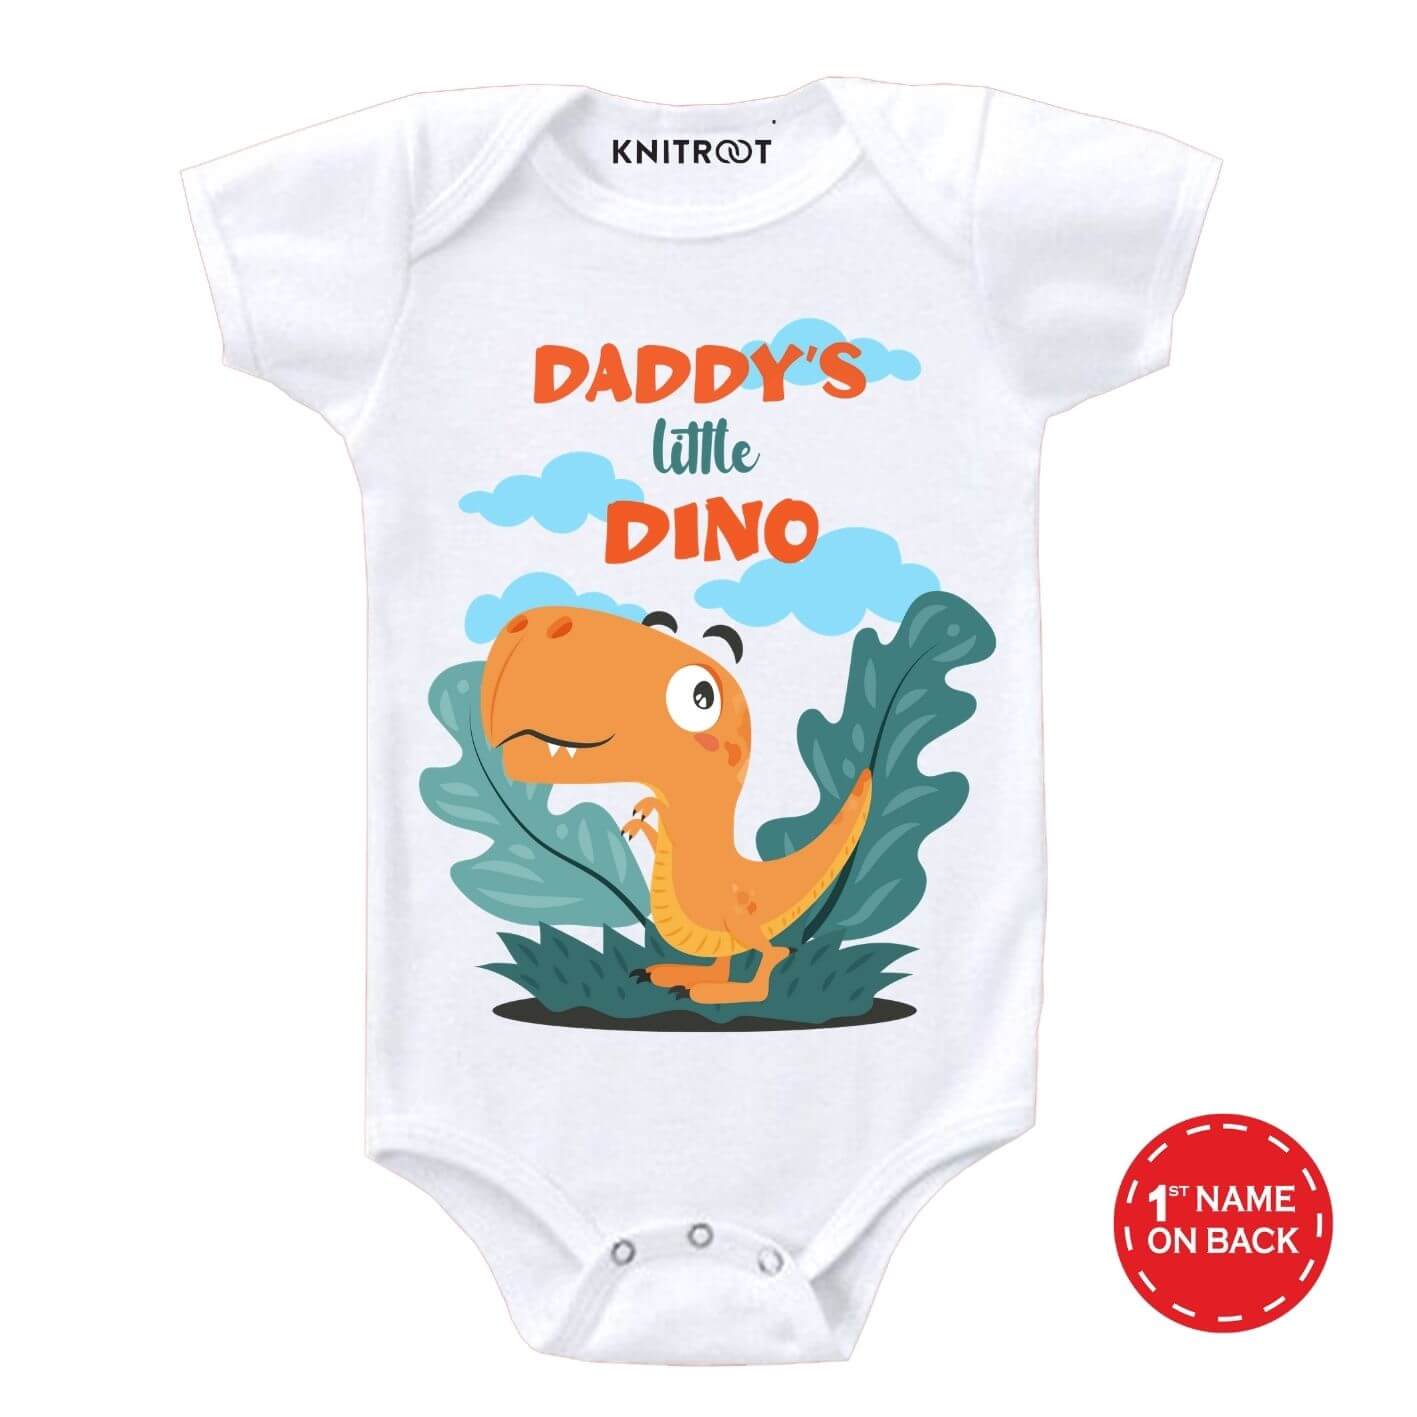 MARBLE SETTER BODY SUIT PERSONALISED DADDYS LITTLE BABY GROW GIFT 